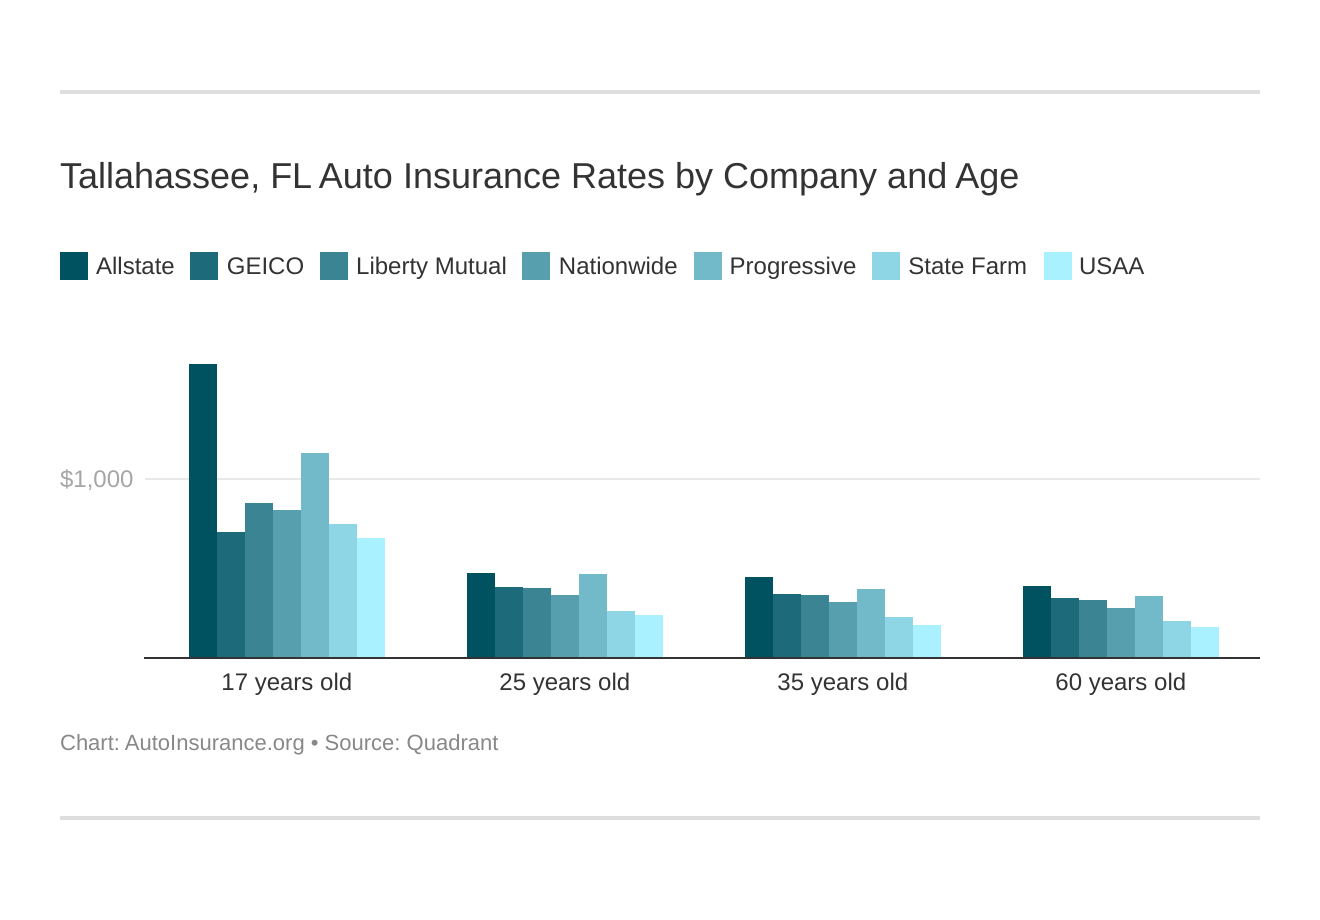 Tallahassee, FL Auto Insurance Rates by Company and Age